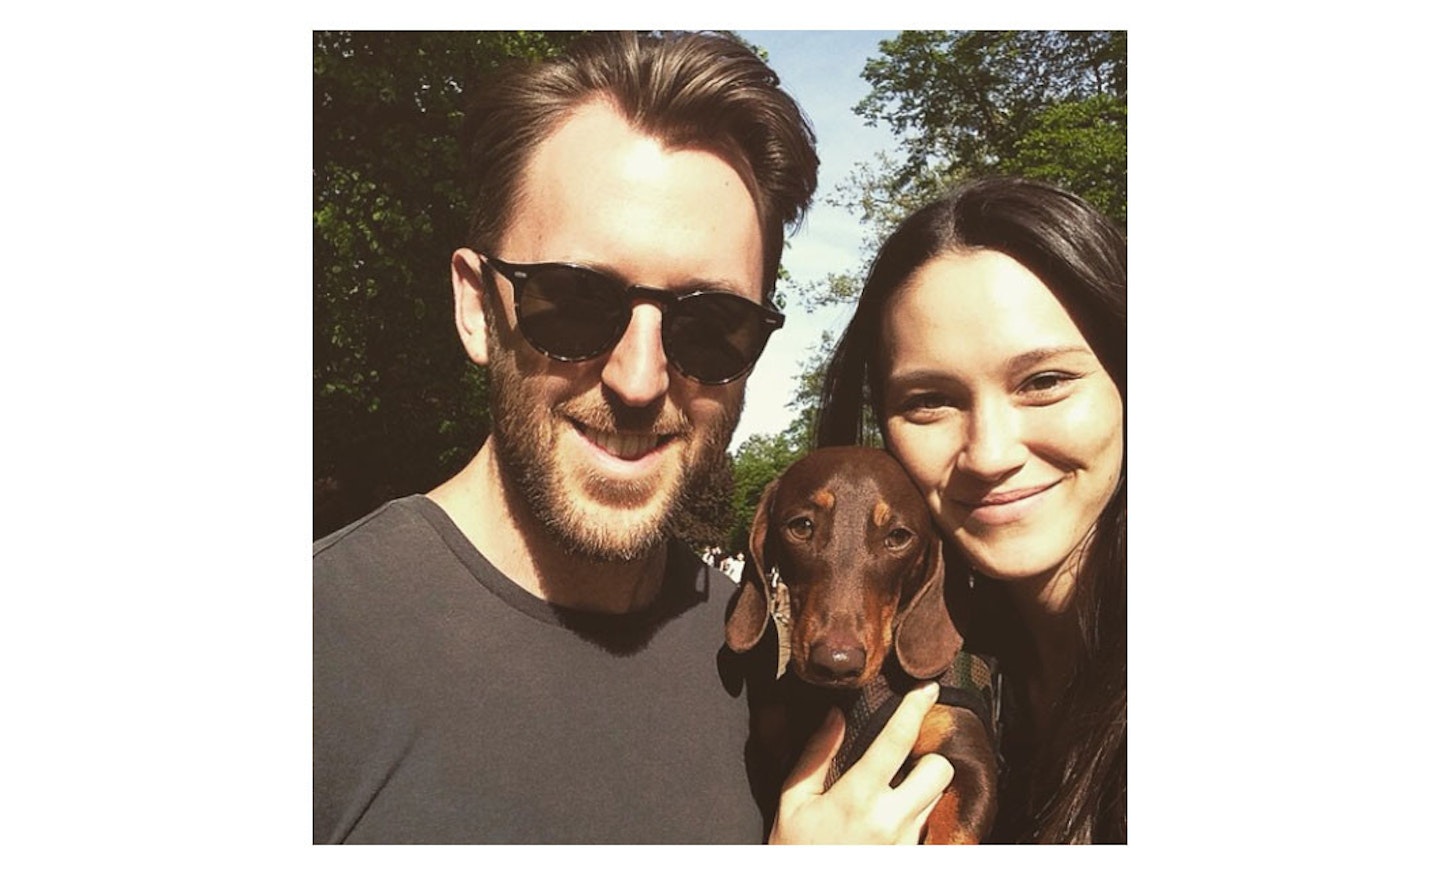 Lee with his fiancee and dog, Teddy.